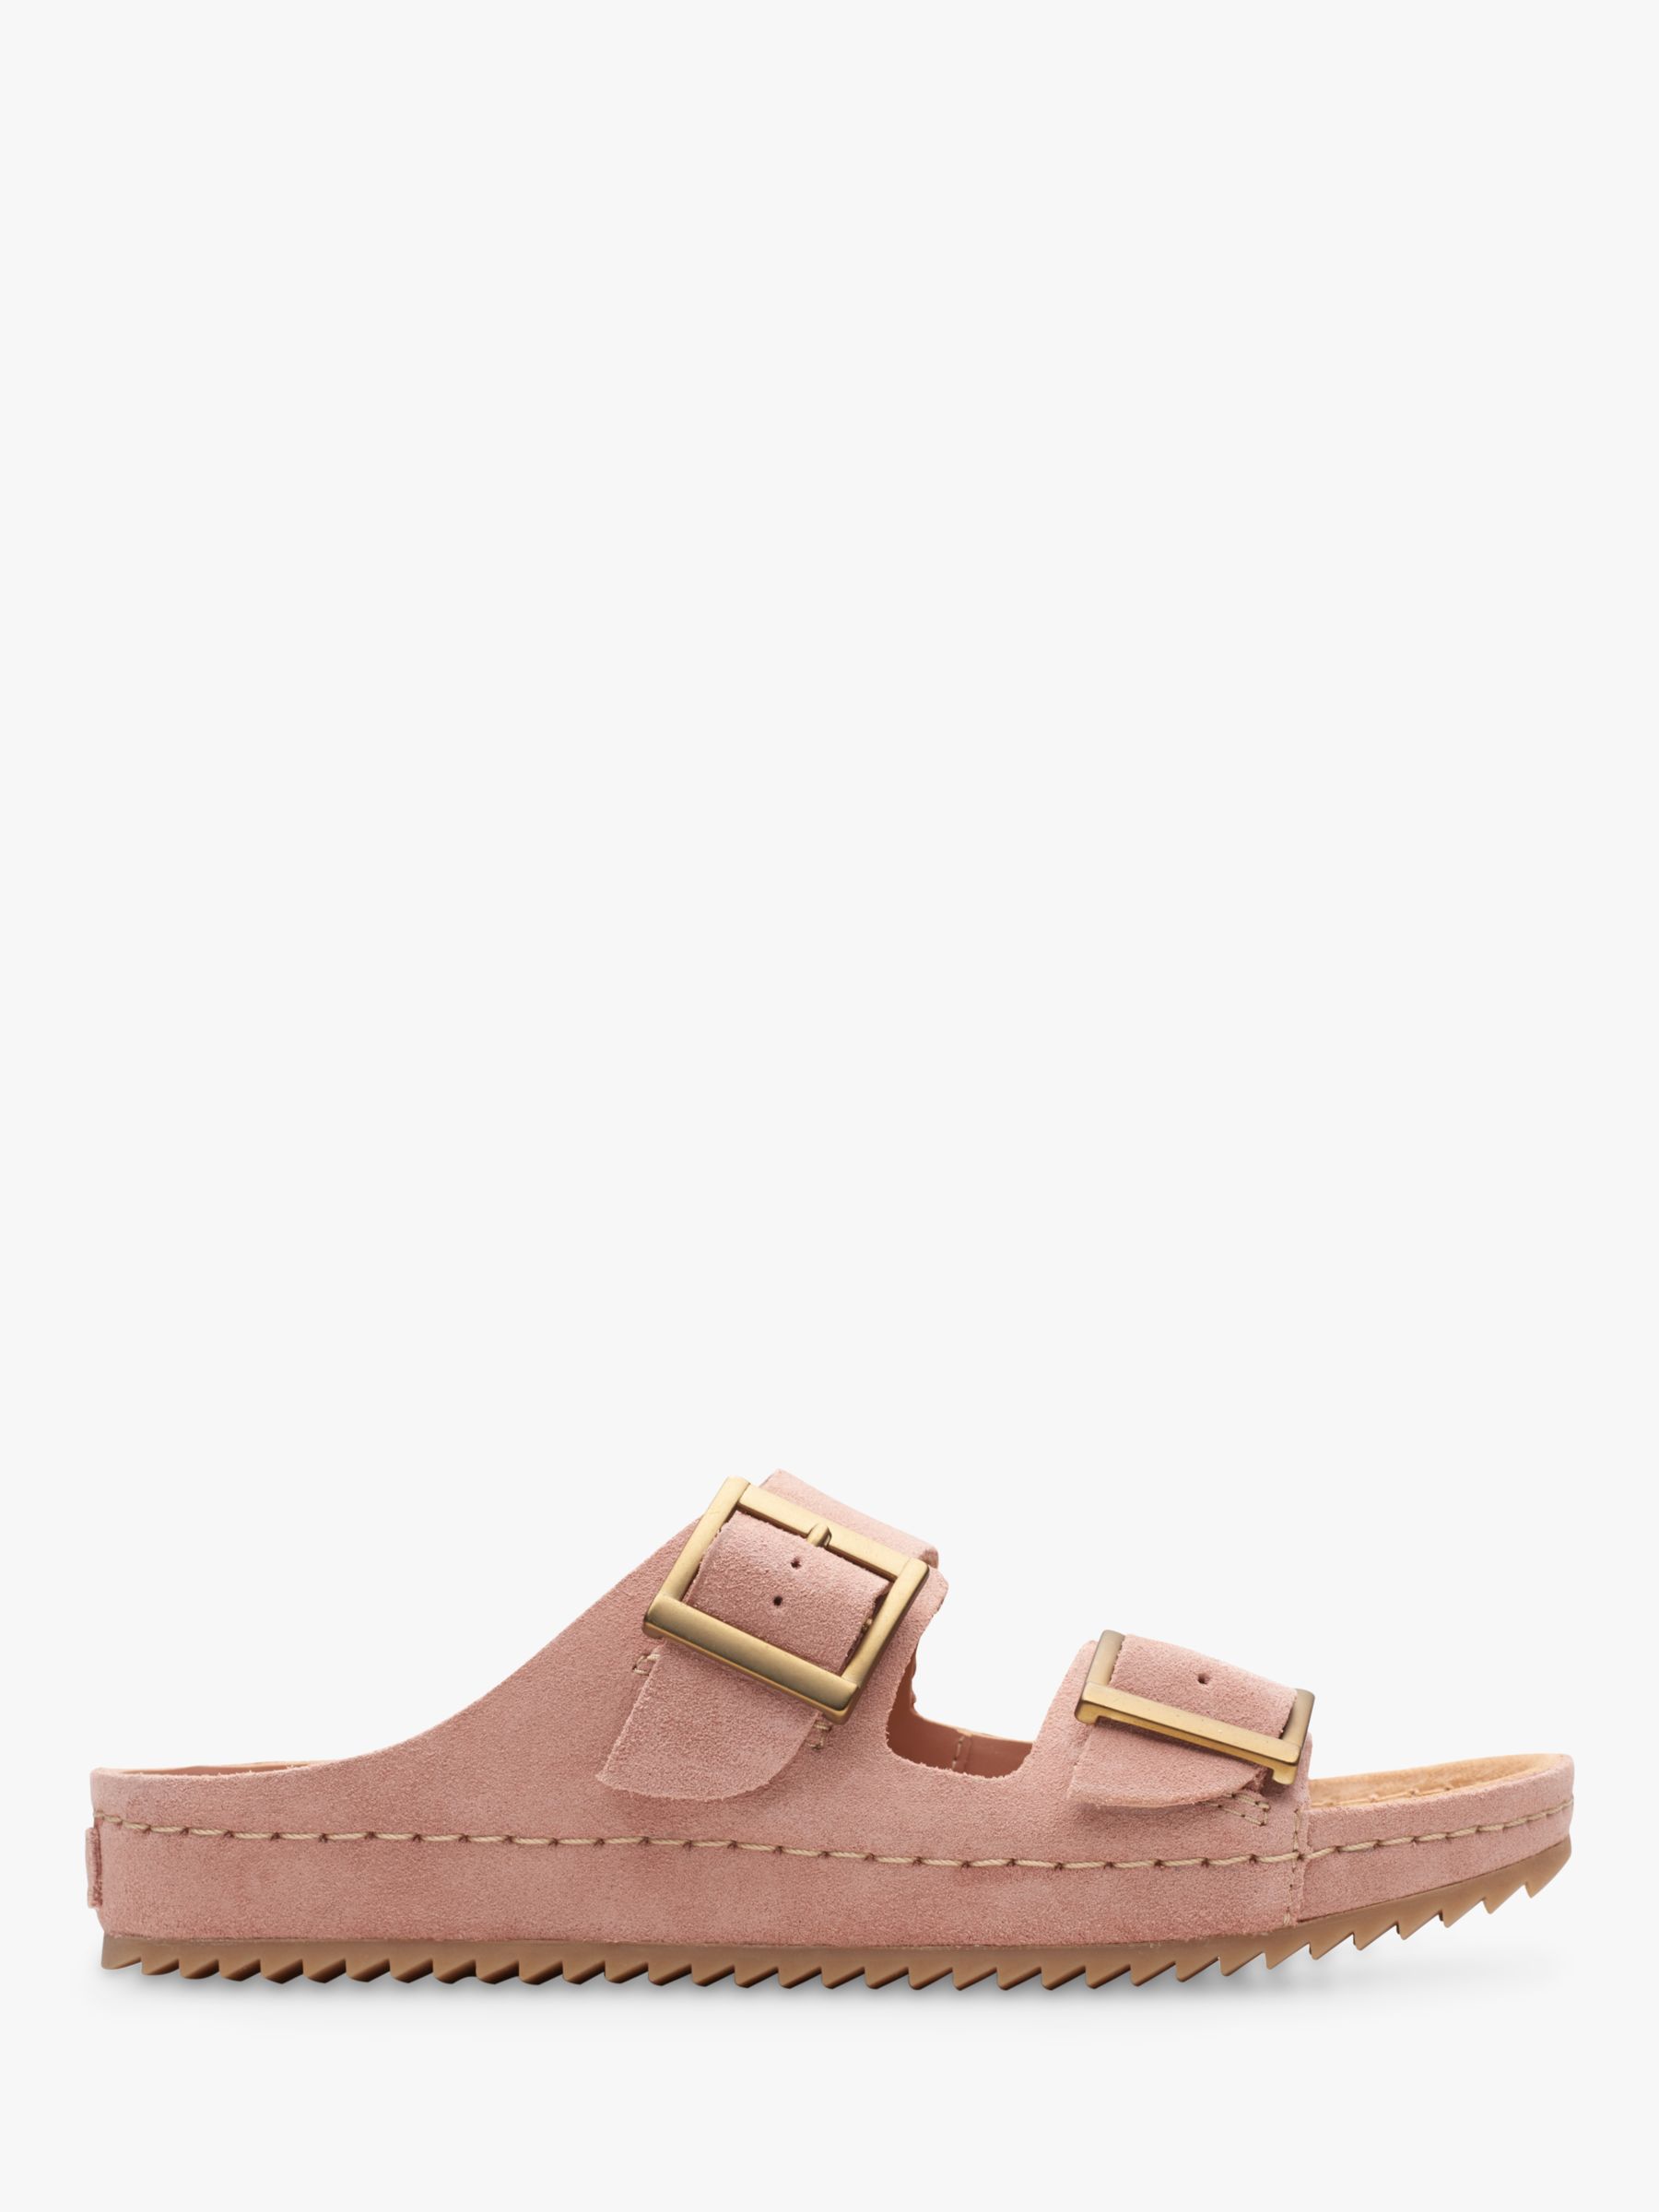 Clarks Brookleigh Sun Suede Footbed Sandals, Rose at John Lewis & Partners